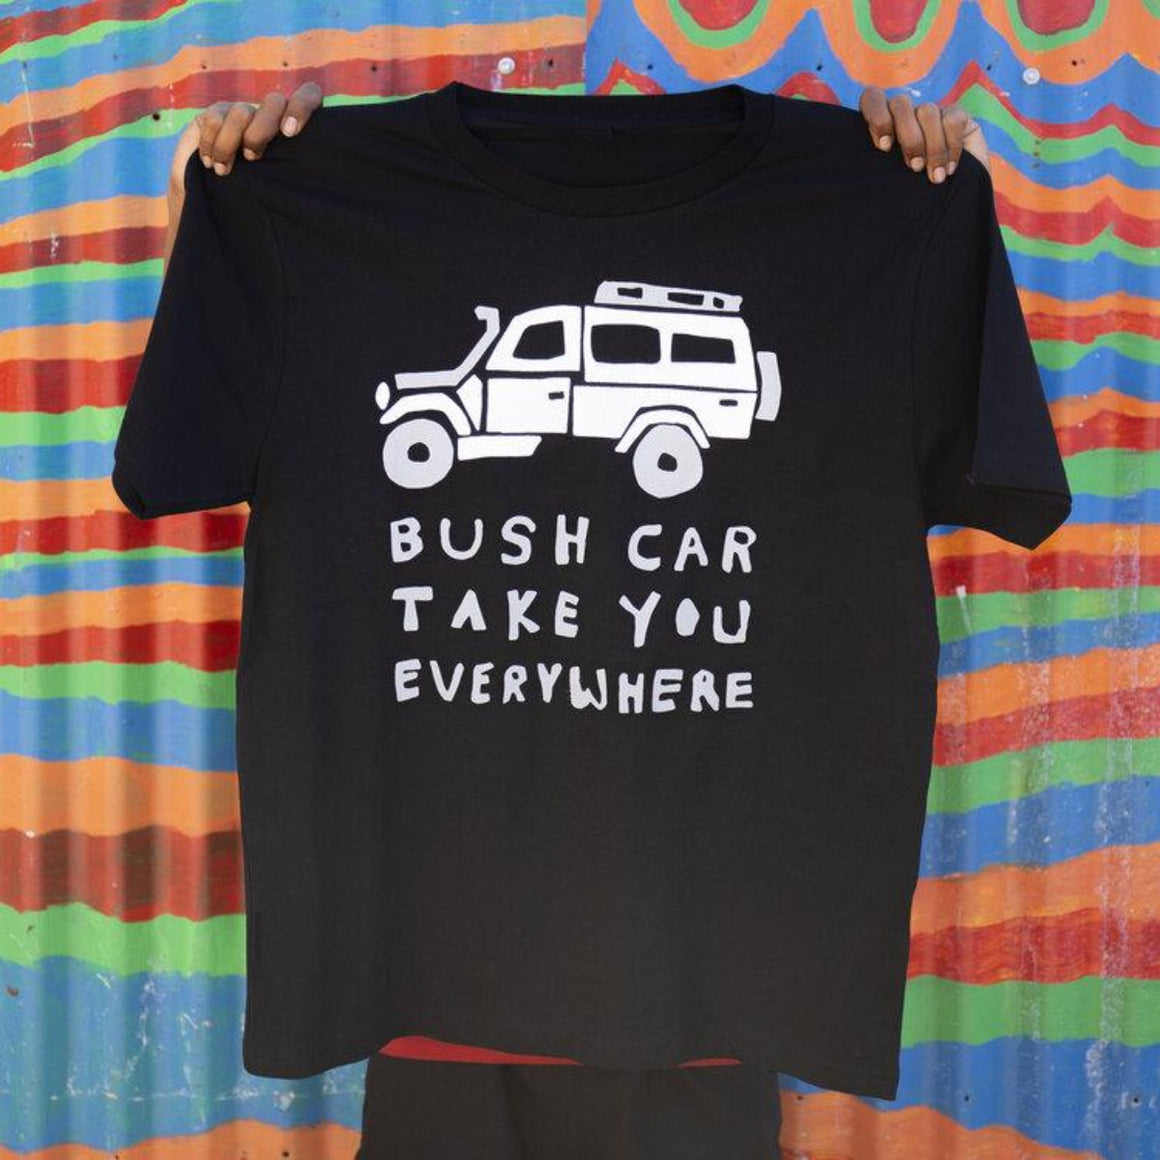 A person displays a black tshirt, holding it up in front of them b the shoulders. An image of a 4WD and text in white features on the black t-shirt. The text reads "Bush Car Take you everywhere"